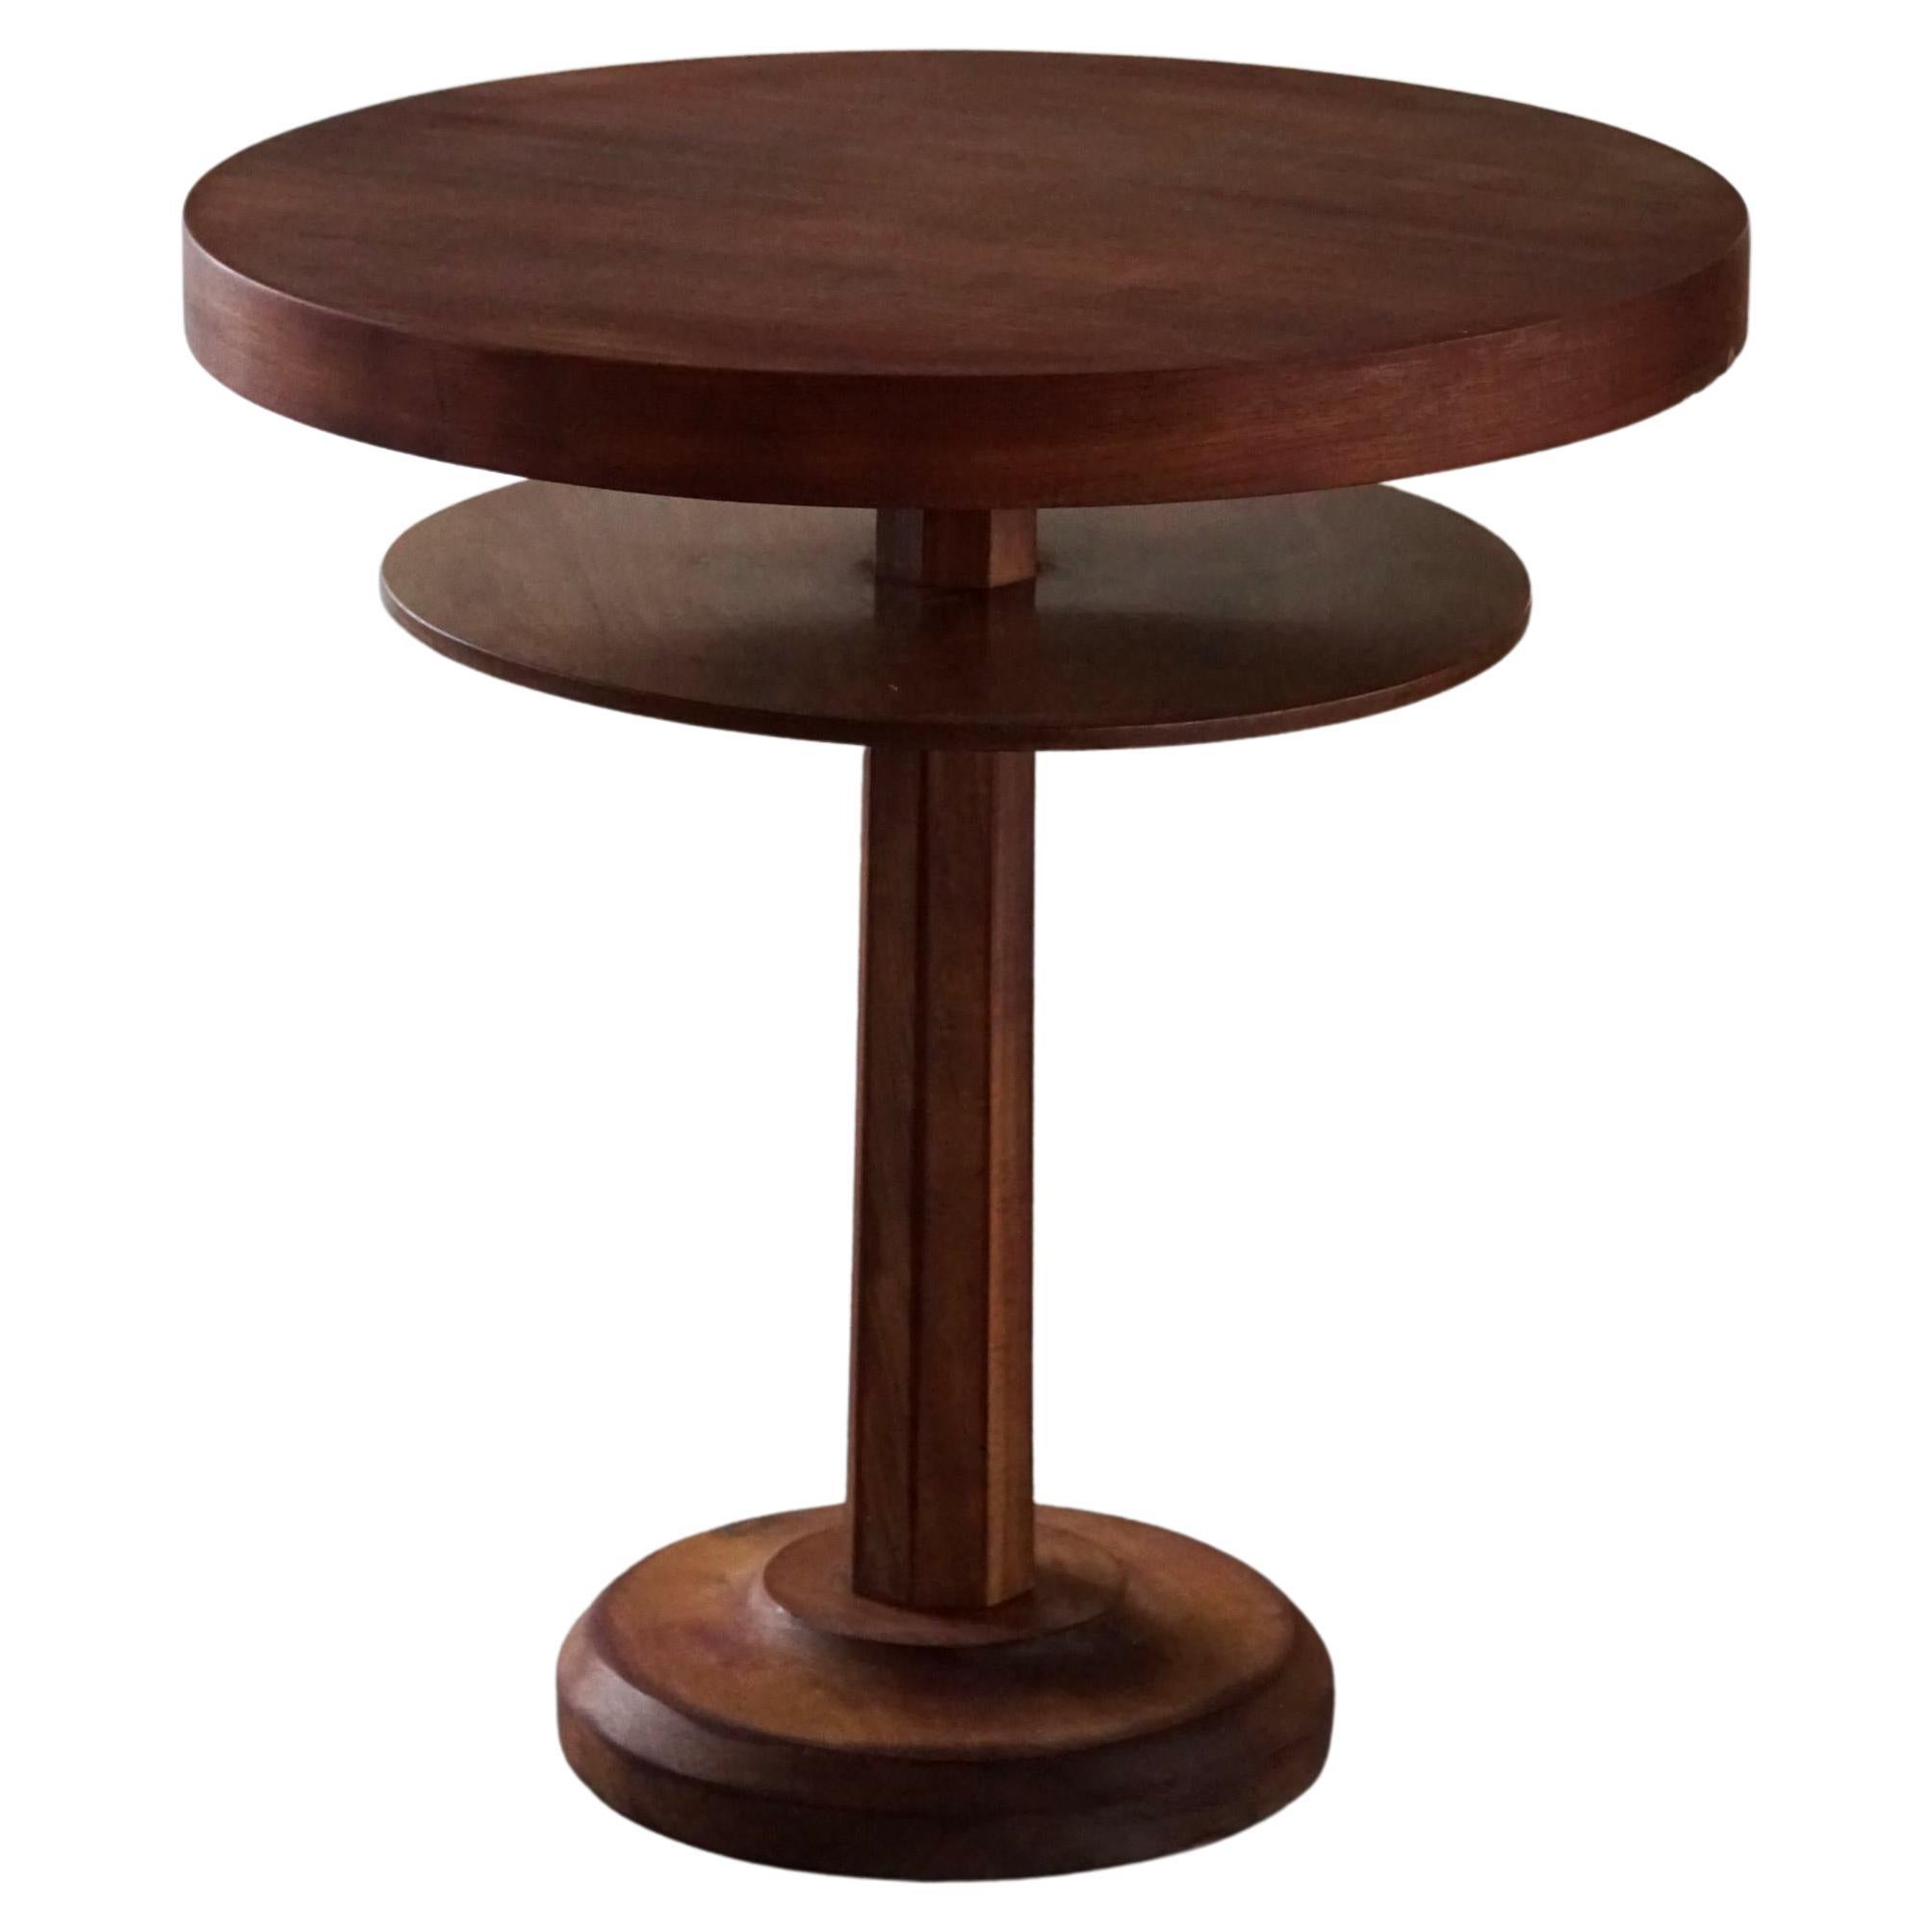 Danish Round Art Deco Side Table / Coffee Table in Teak, Made in 1940s